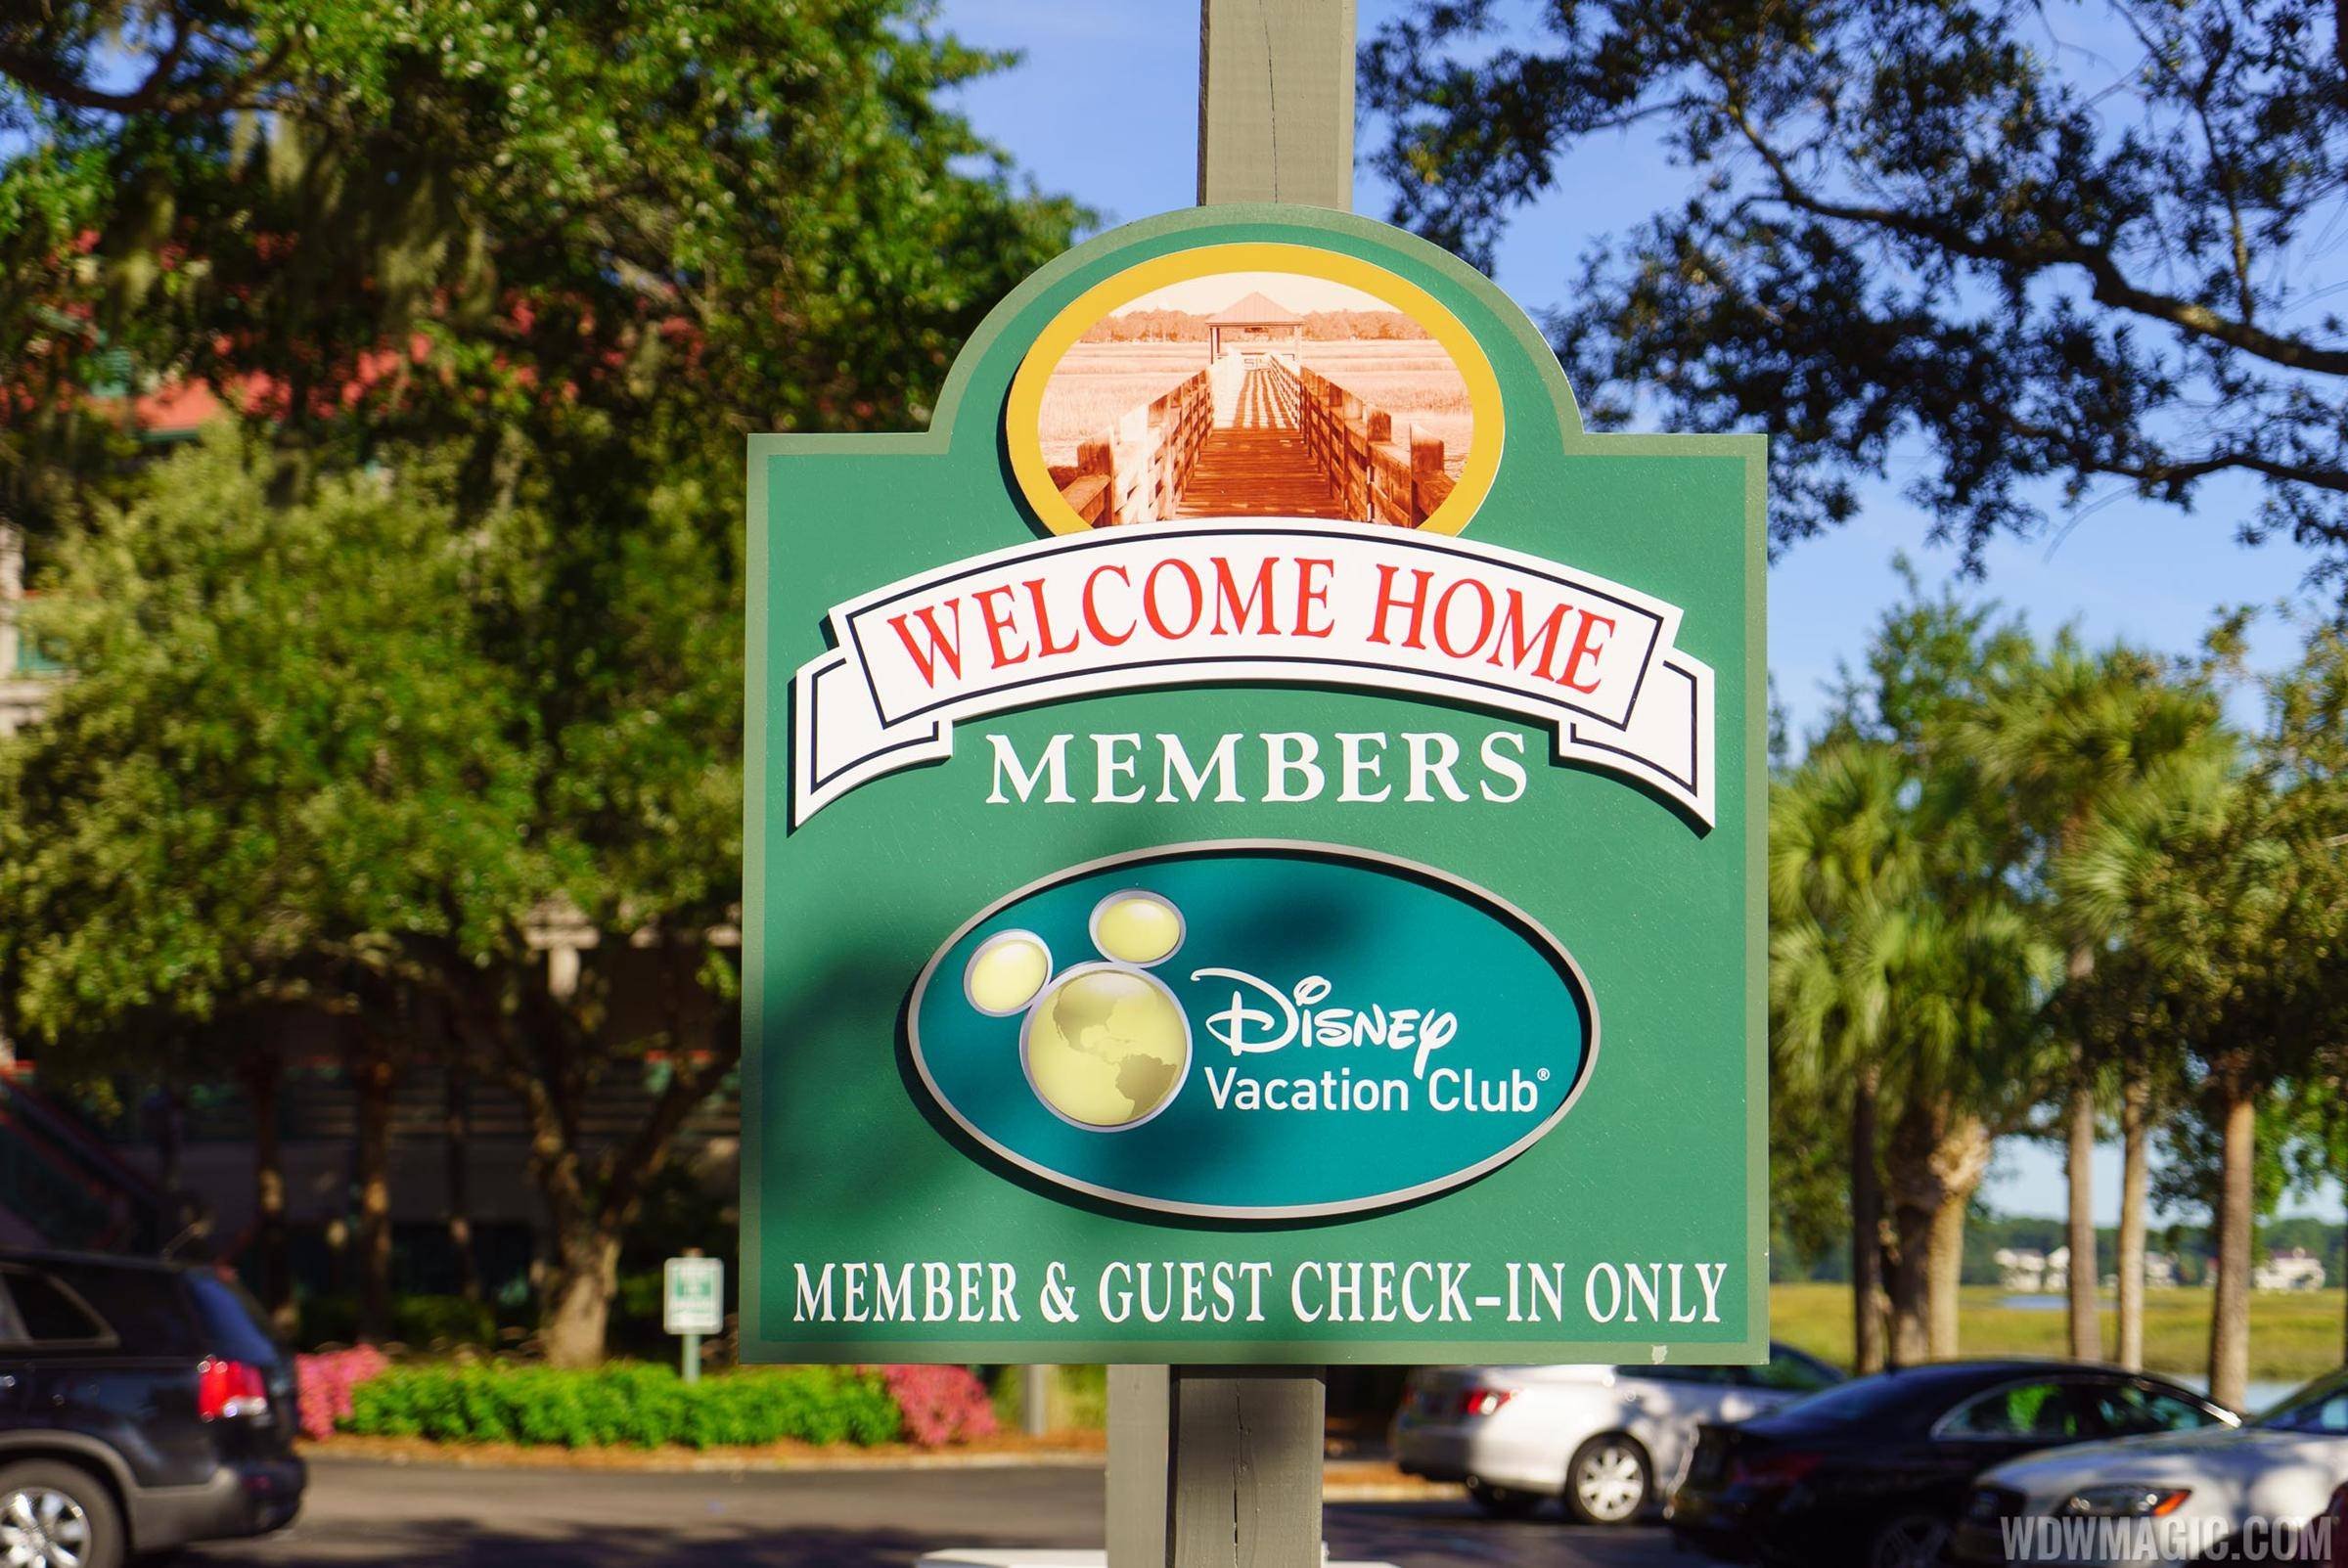 Disney Vacation Club members join Annual Passholders with 30 percent merchandise discount